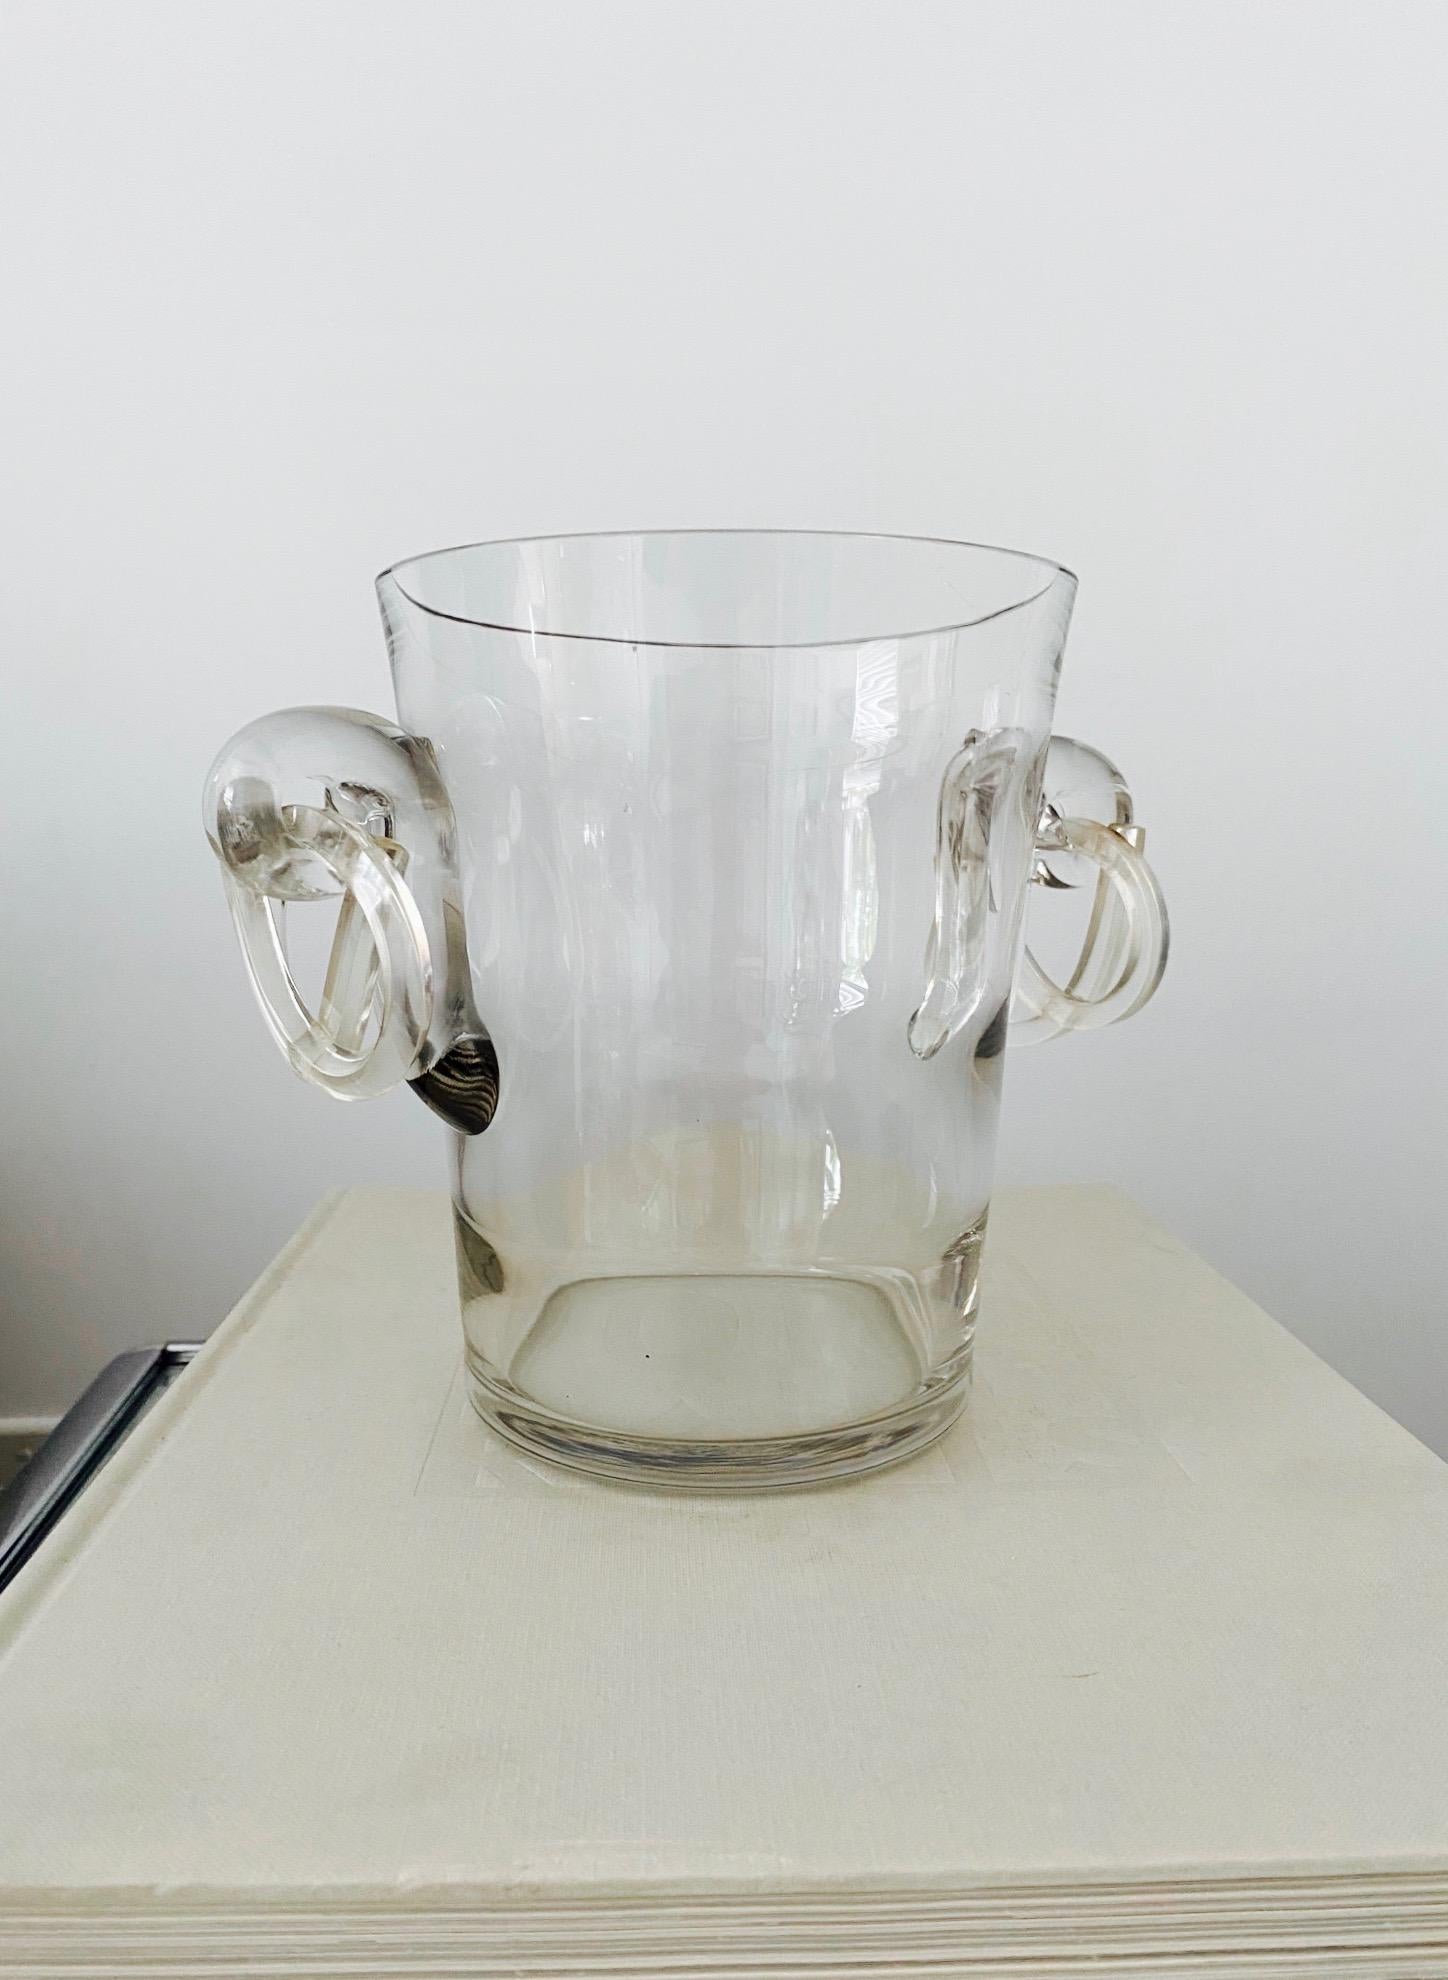 Italian Mid-Century Modern crystal ice bucket or champagne cooler with stylized pretzel handles in lucite. The cooler has a slight tapered form with horizontal fluted details and features blown glass scrolls on either side. All handcrafted with